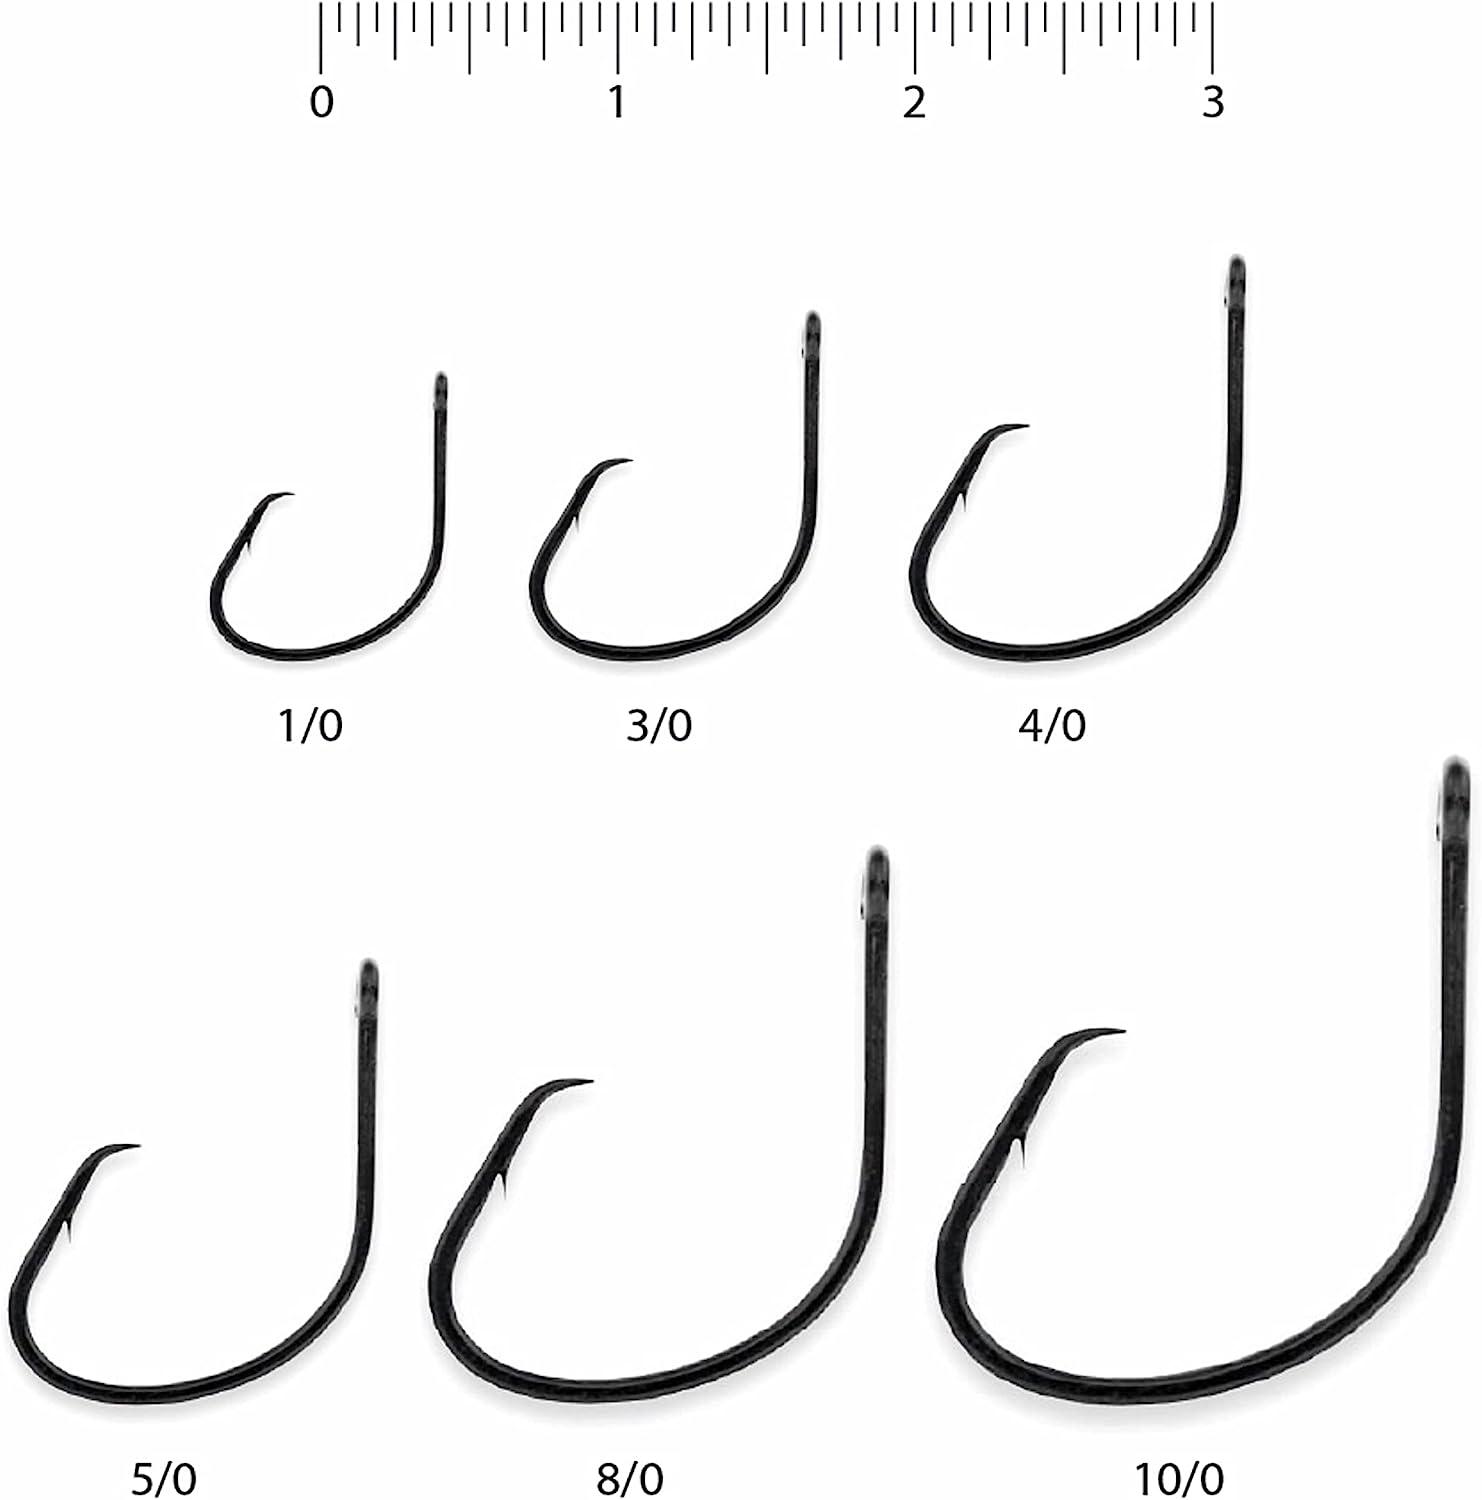 Team Catfish Double Action Circle Hooks with Wide Gap and Needle Sharp  Point 10/0 Black